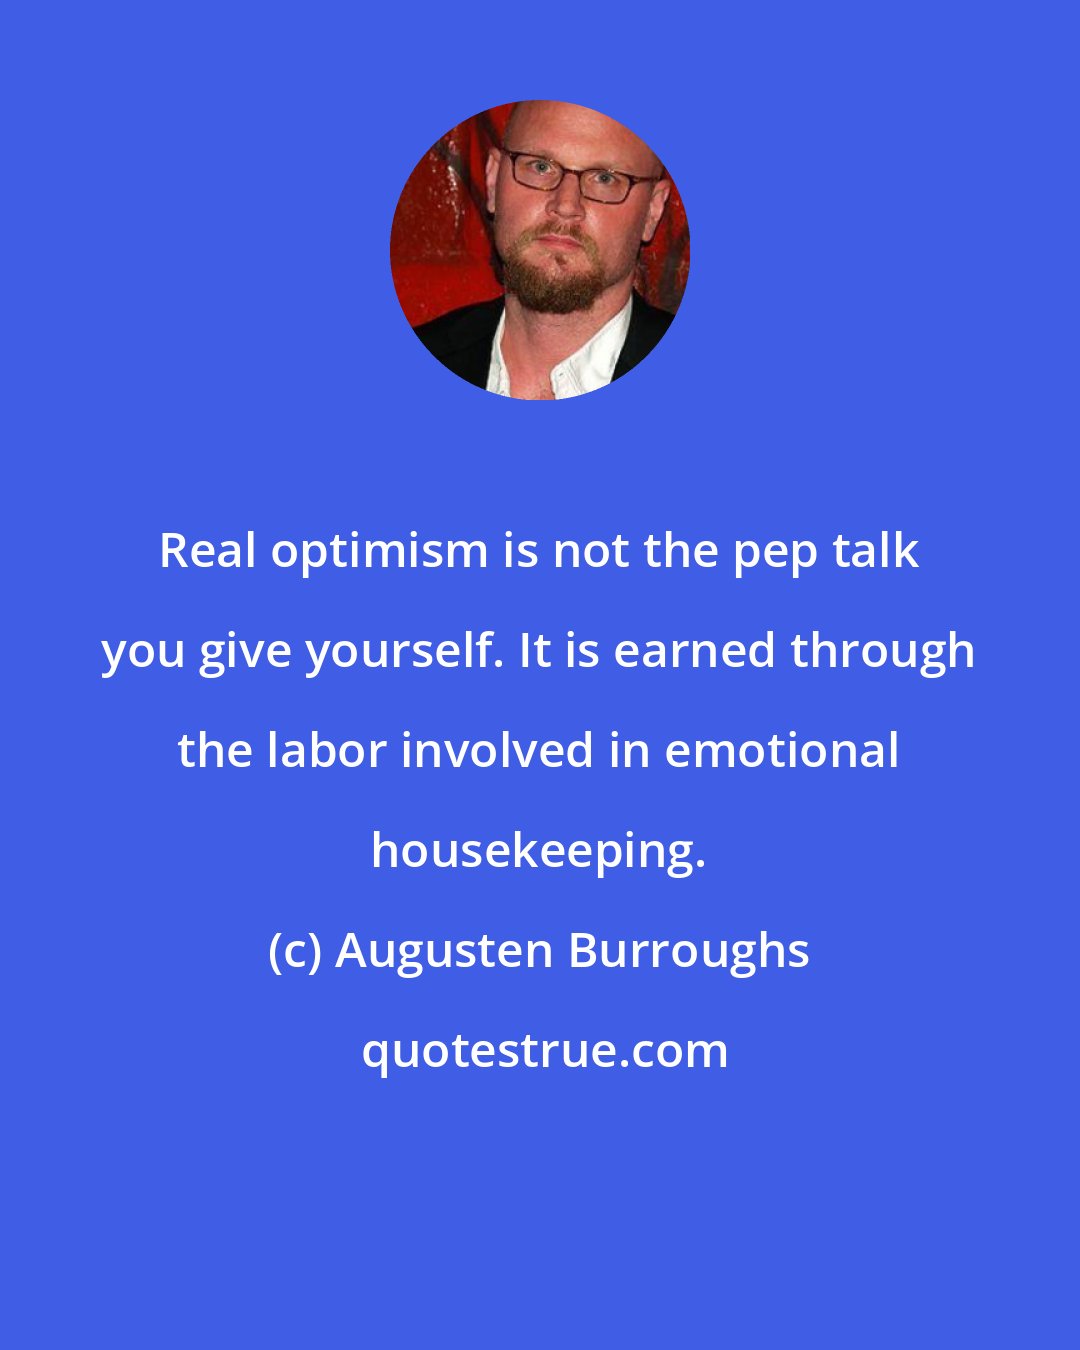 Augusten Burroughs: Real optimism is not the pep talk you give yourself. It is earned through the labor involved in emotional housekeeping.